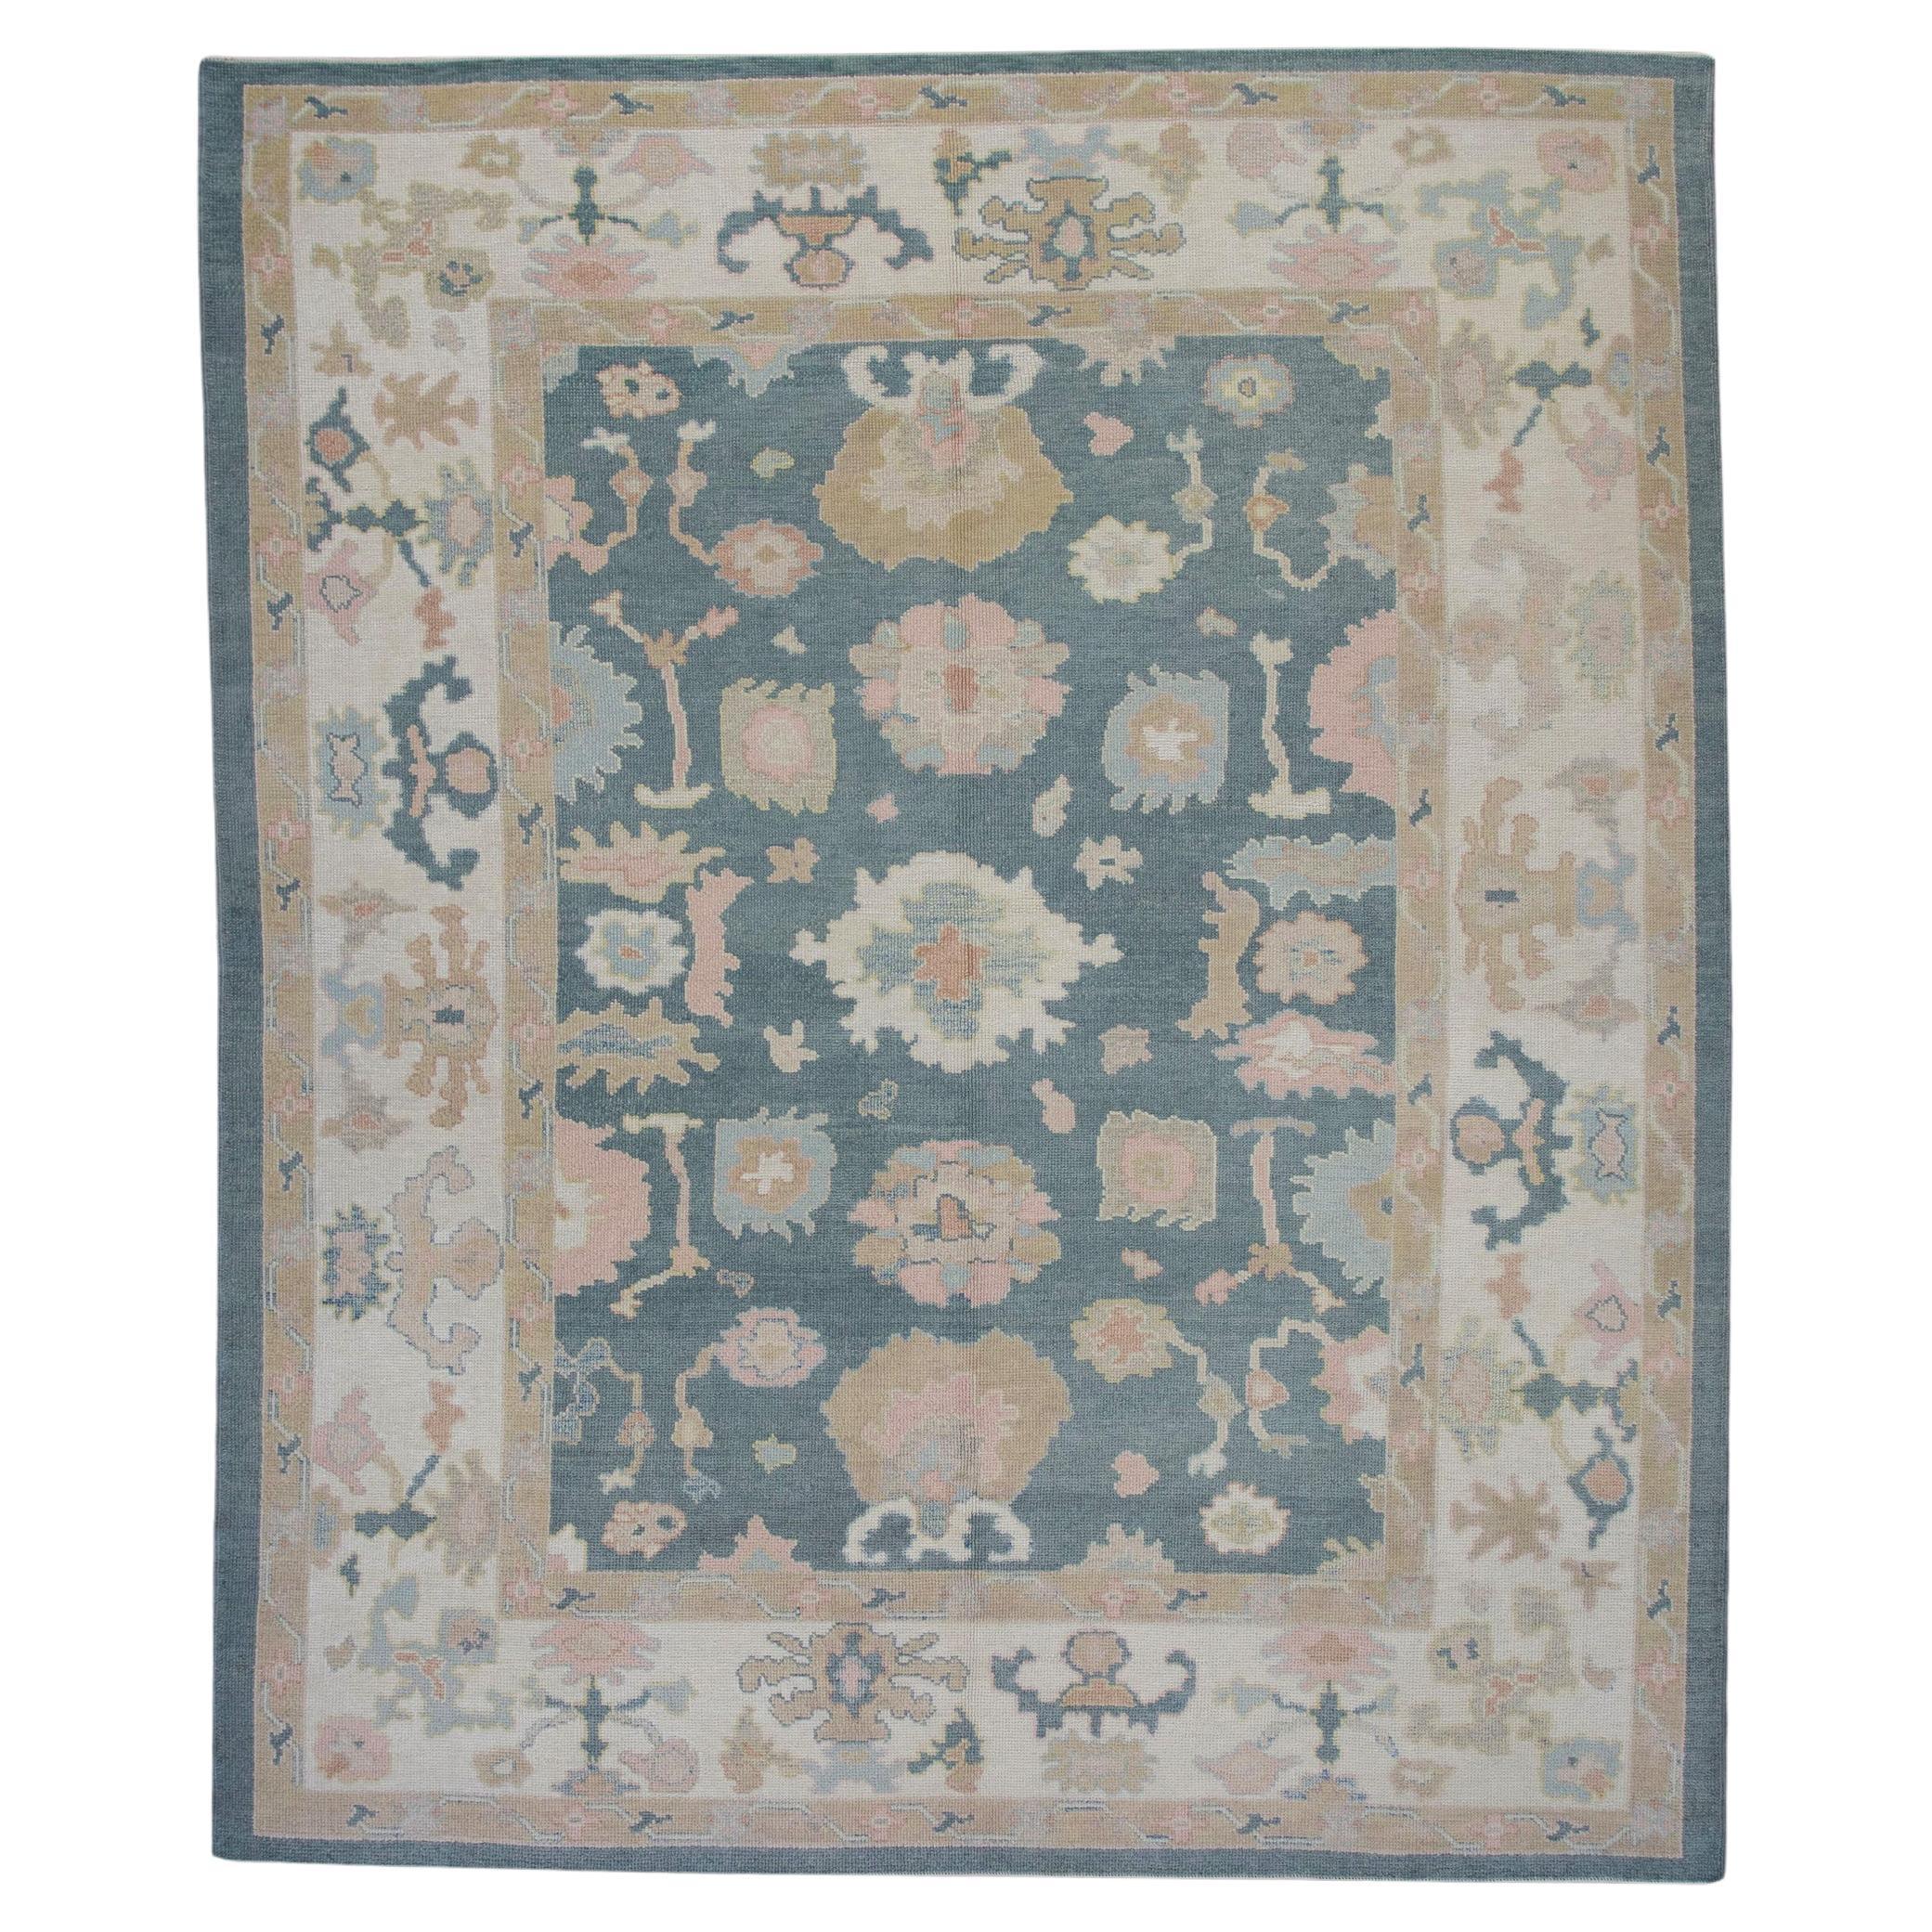 Blue and Pink Handwoven Wool Floral Pattern Turkish Oushak Rug 8'7" x 9'10" For Sale